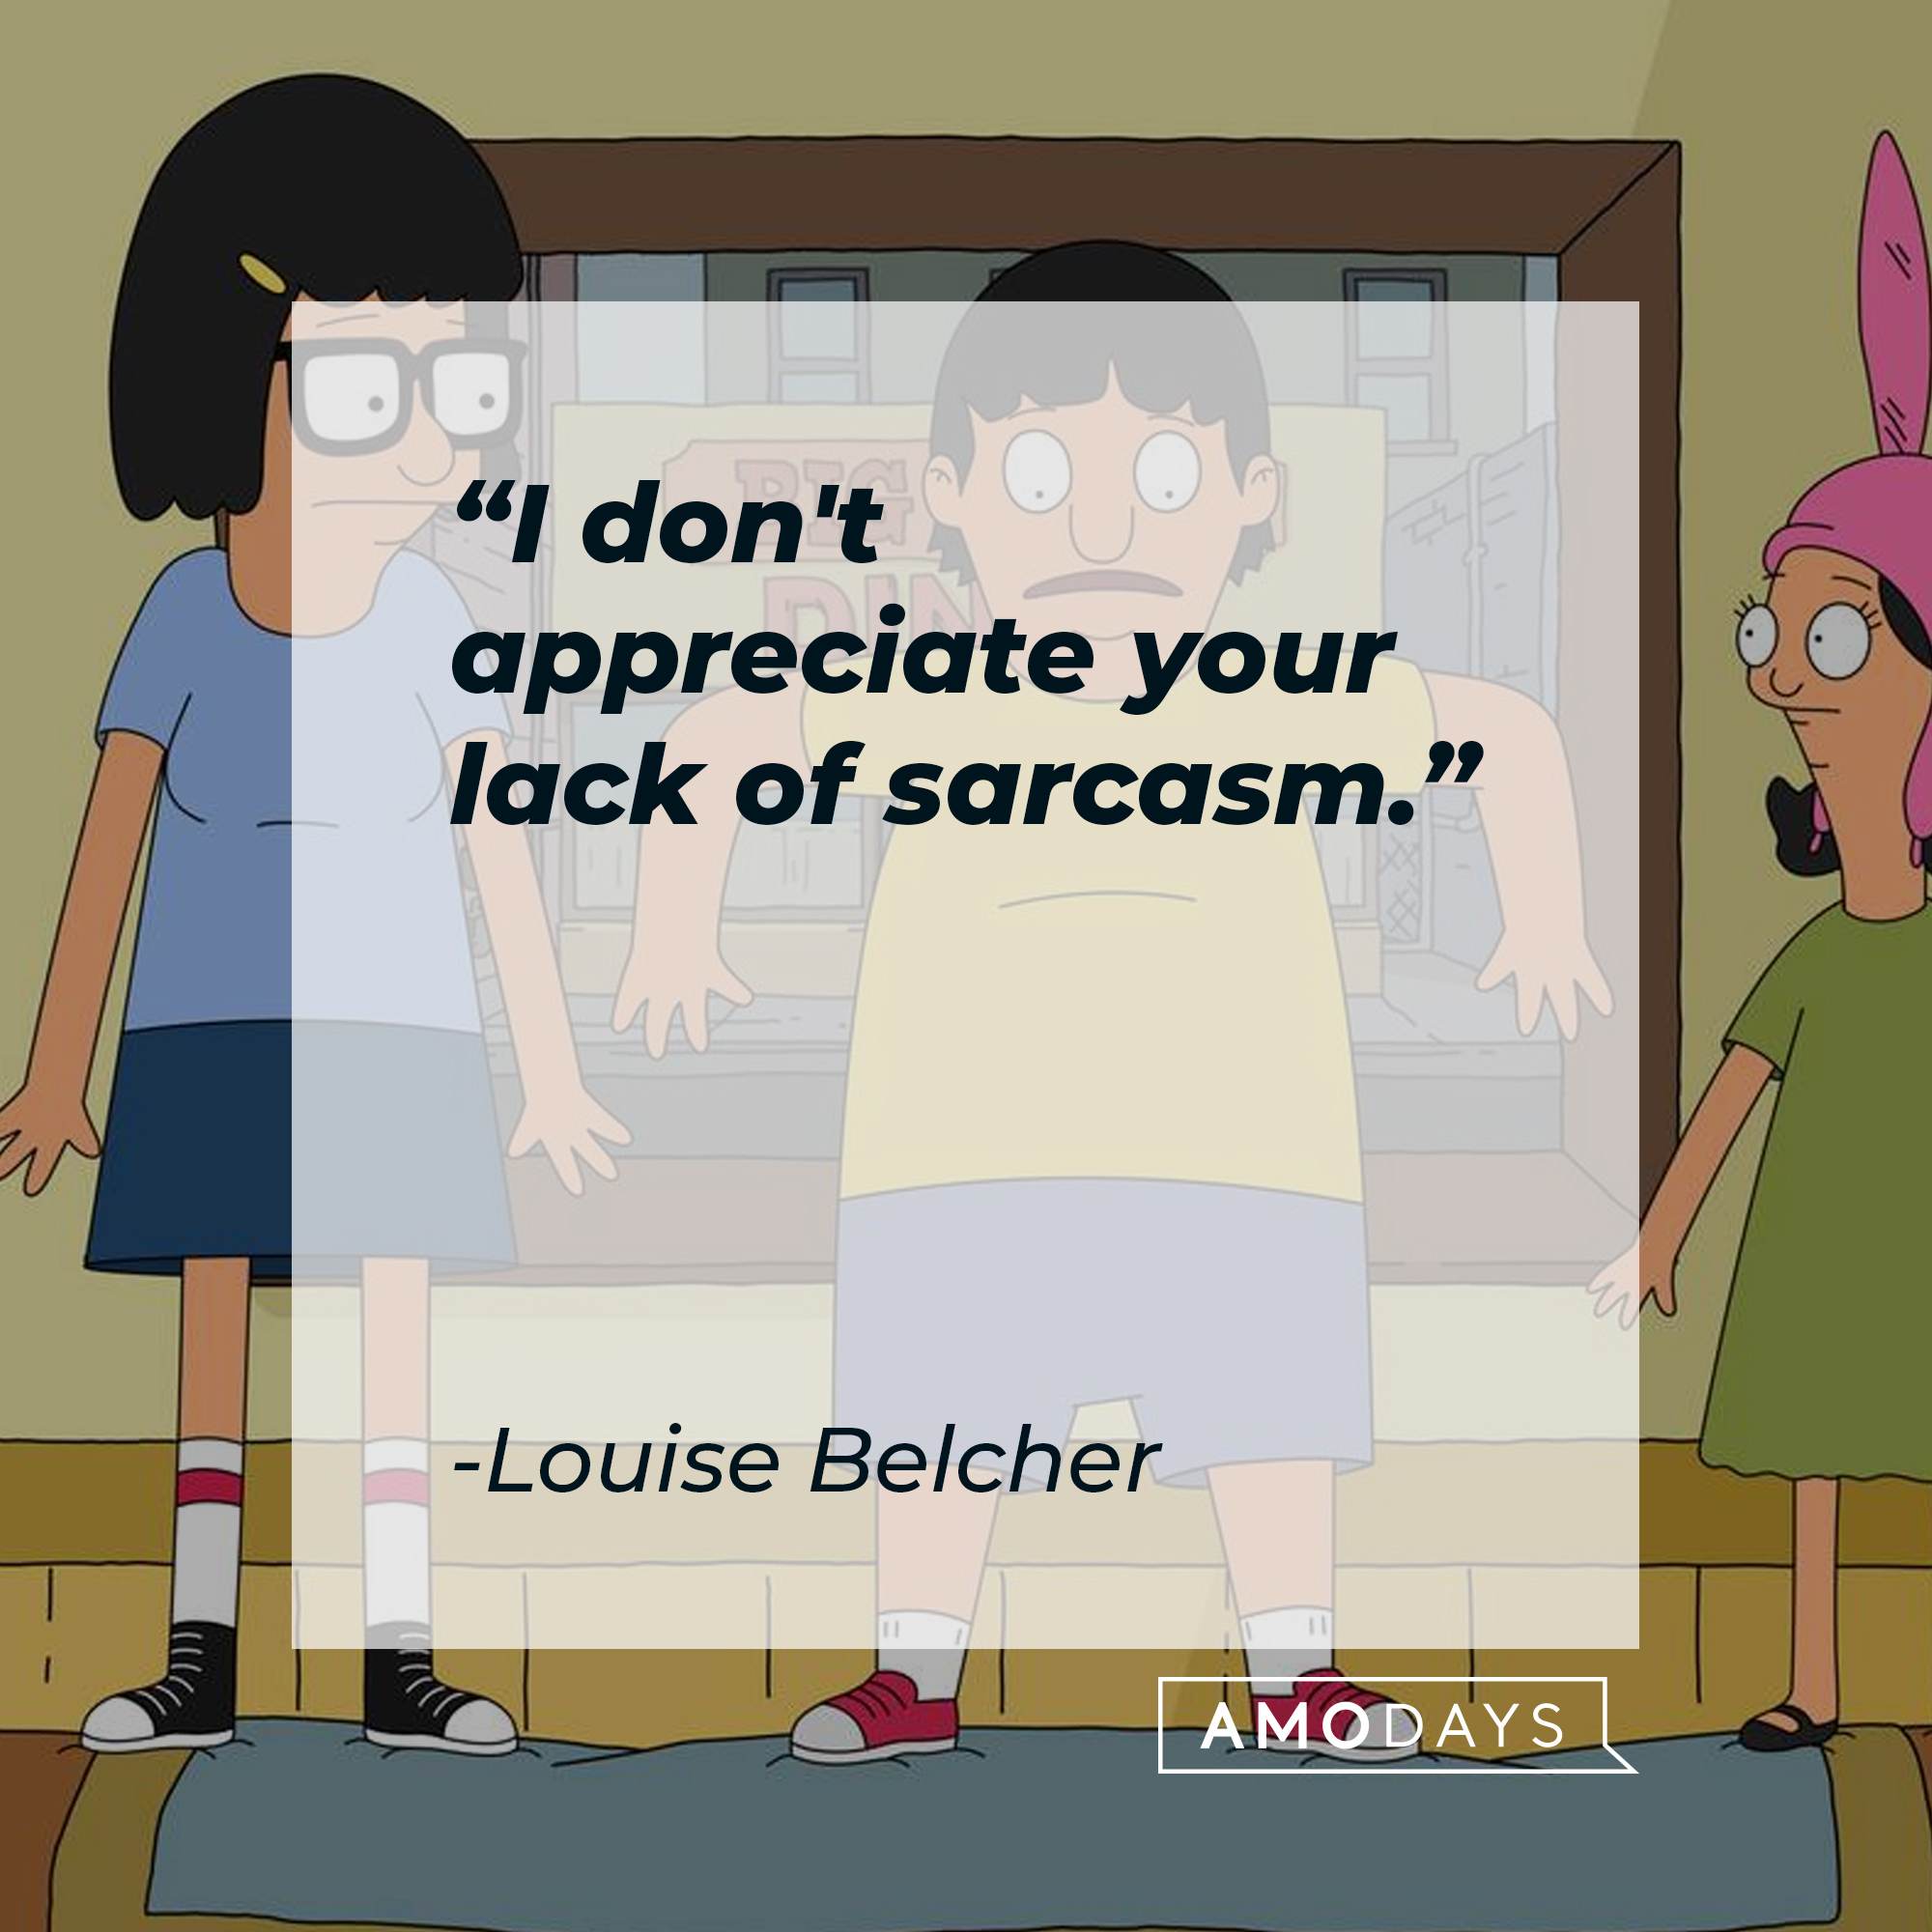 Characters from “Bob’s Burger’s,” including Louise Belcher, with her quote: "I don't appreciate your lack of sarcasm." | Source: Facebook.com/BobsBurgers